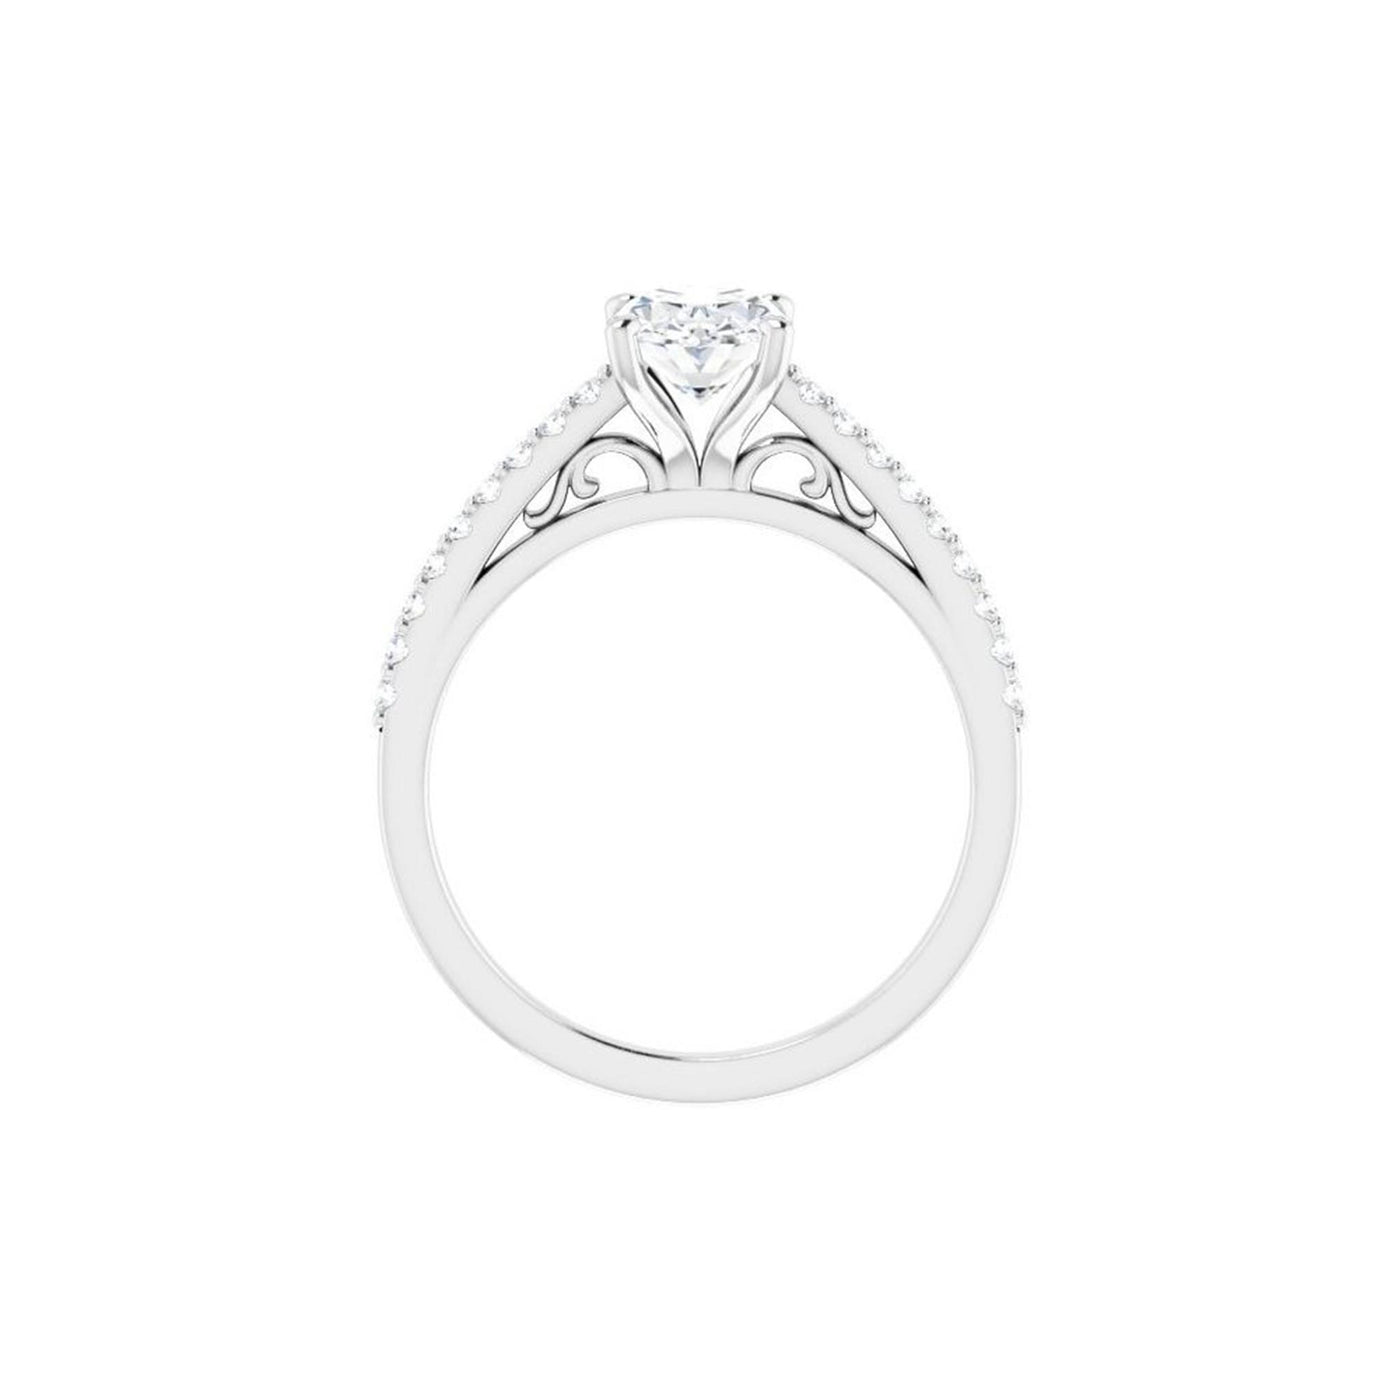 Ever & Ever 14K White Gold .20ctw 4 Prong Style Diamond Semi-Mount Engagement Ring